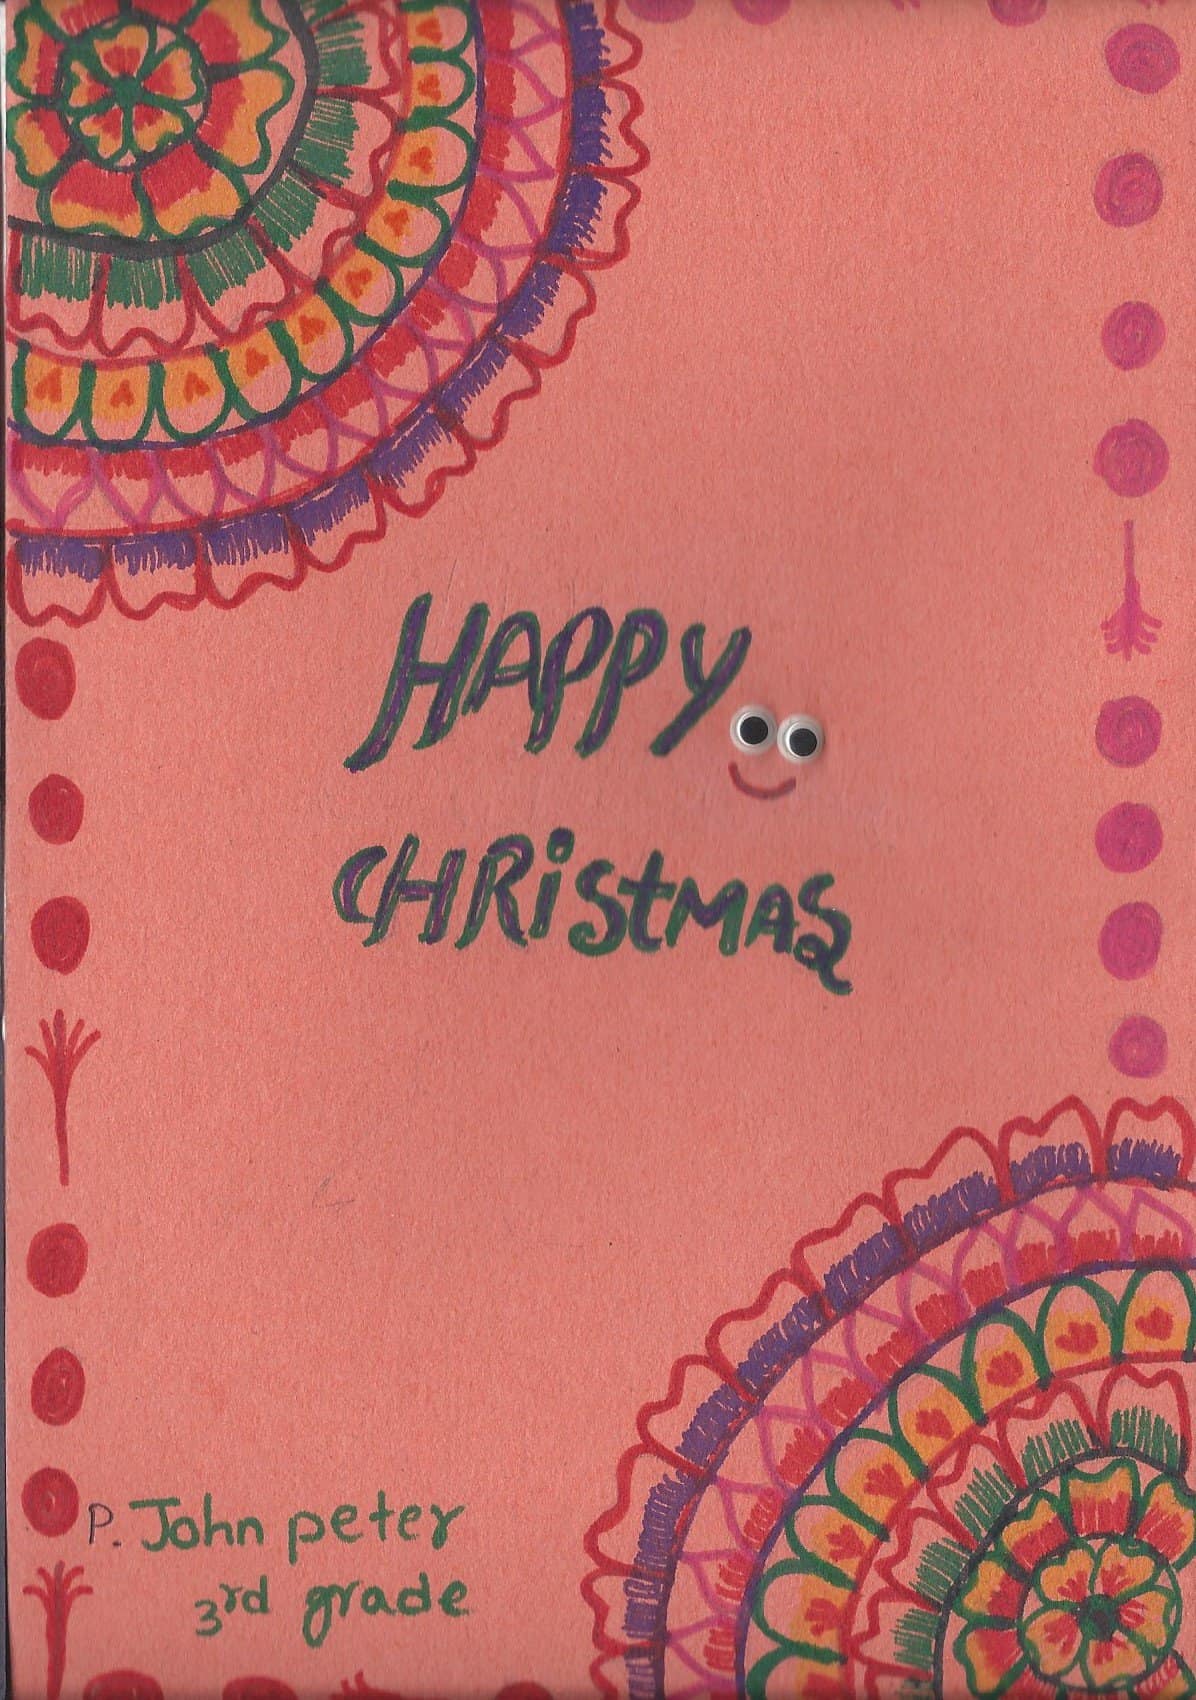 Handmade personalized Christmas Card made by a young child in India.